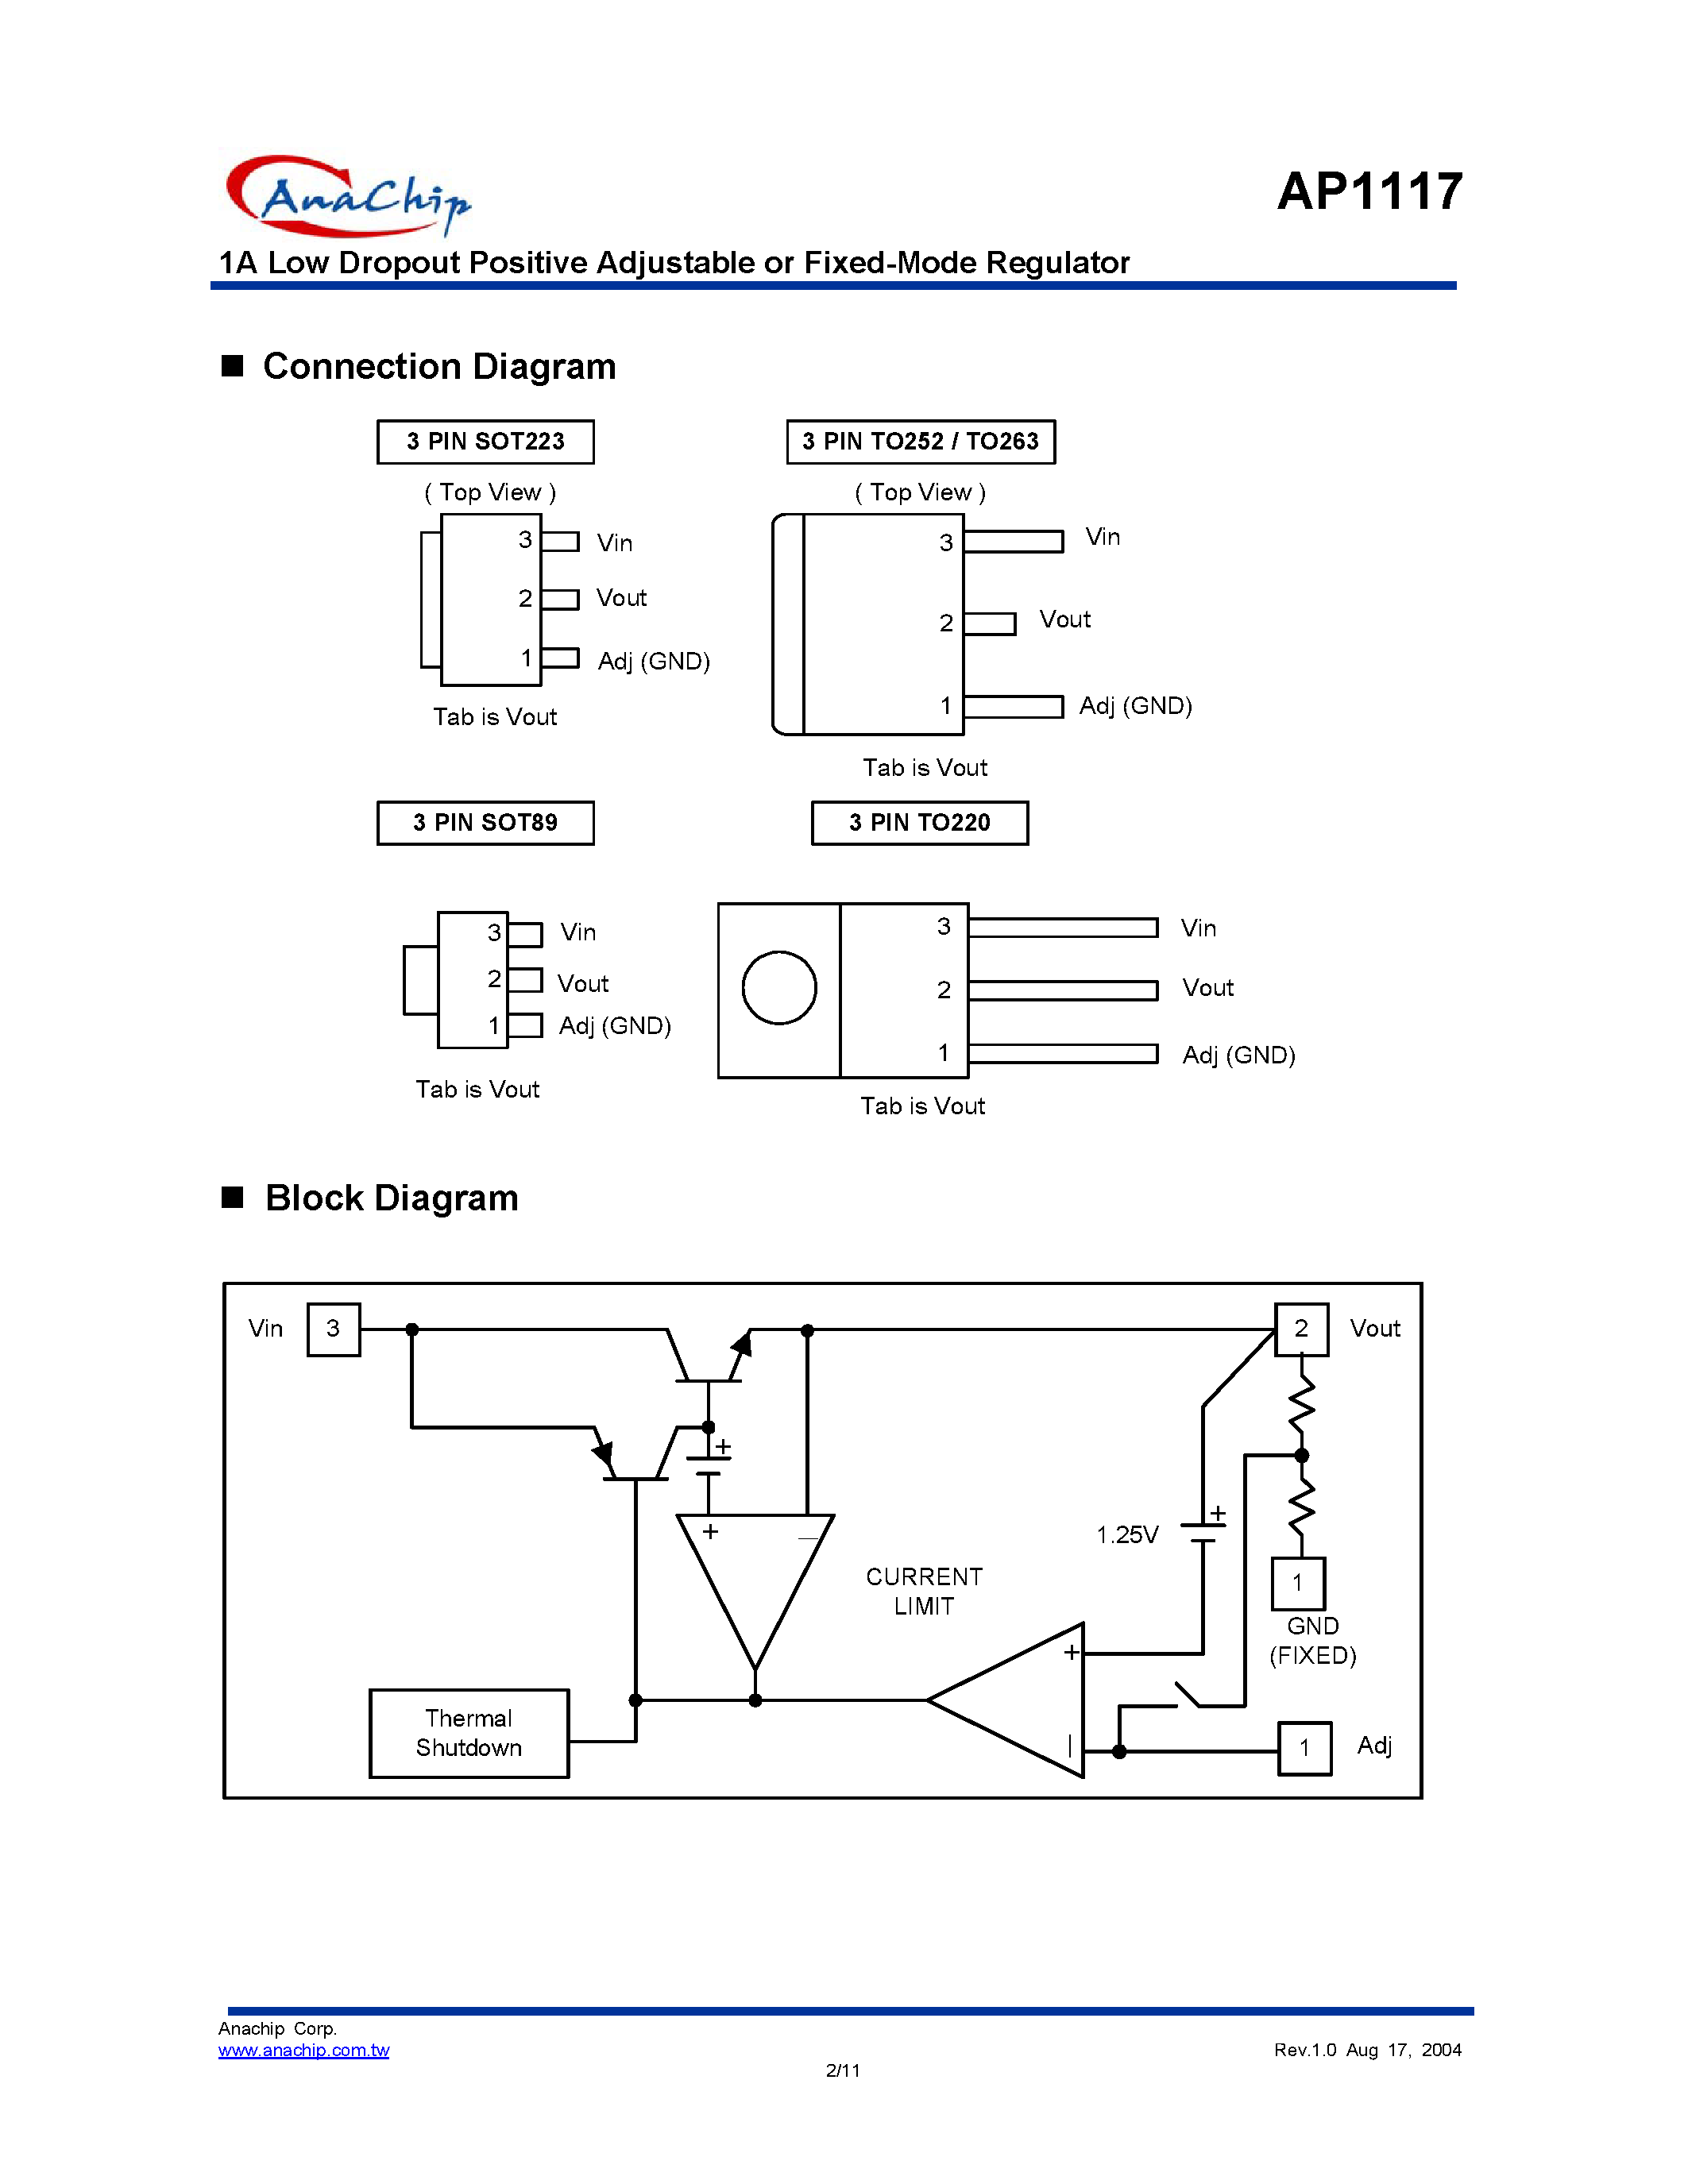 Datasheet AP1117-1.9 - 1A Low Dropout Positive Adjustable or Fixed-Mode Regulator page 2